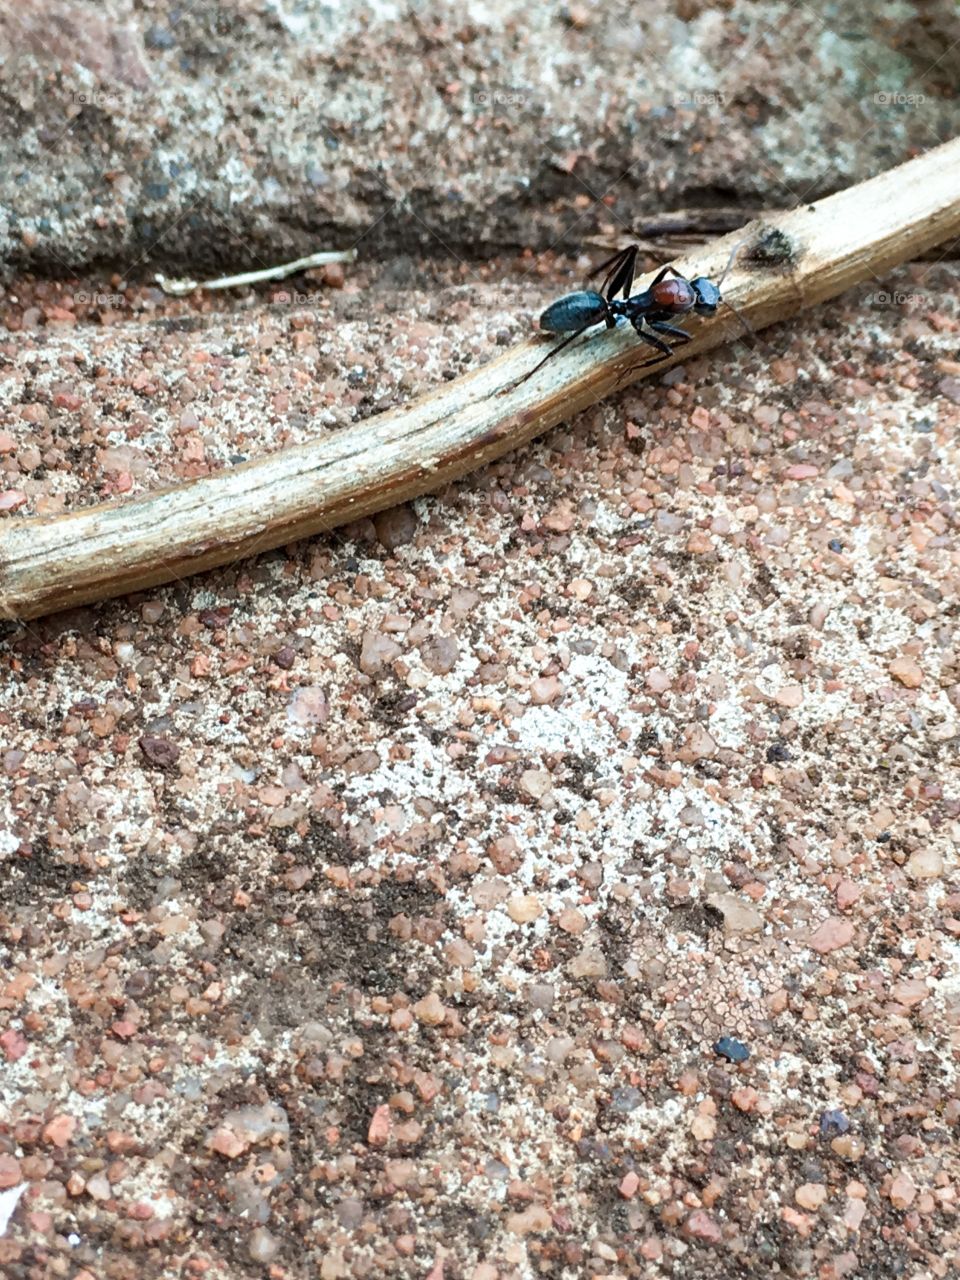 Large multi coloured worker ant crossing and climbing along a fallen tree branch